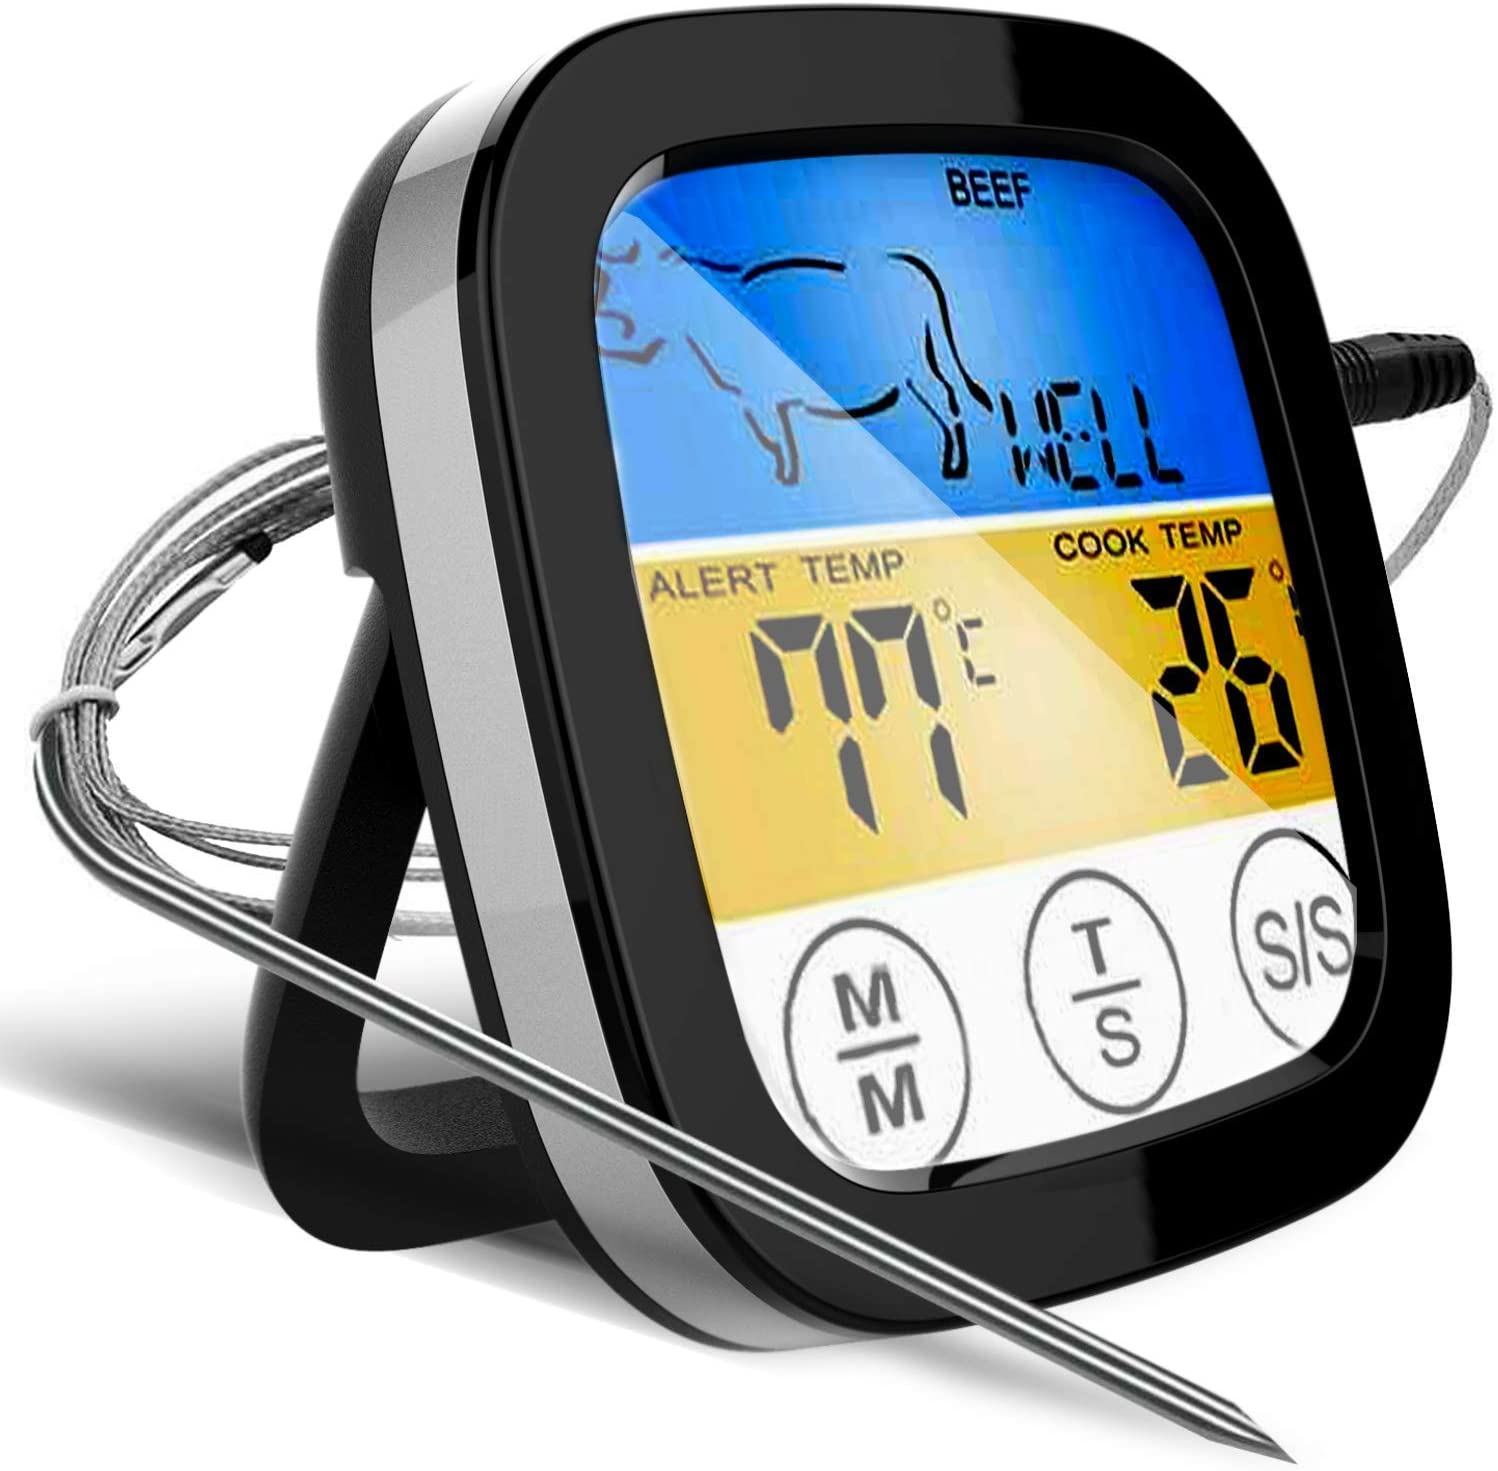 https://www.dontwasteyourmoney.com/wp-content/uploads/2020/11/153-touchscreen-digital-thermometer-silver-digital-meat-thermometer.jpg